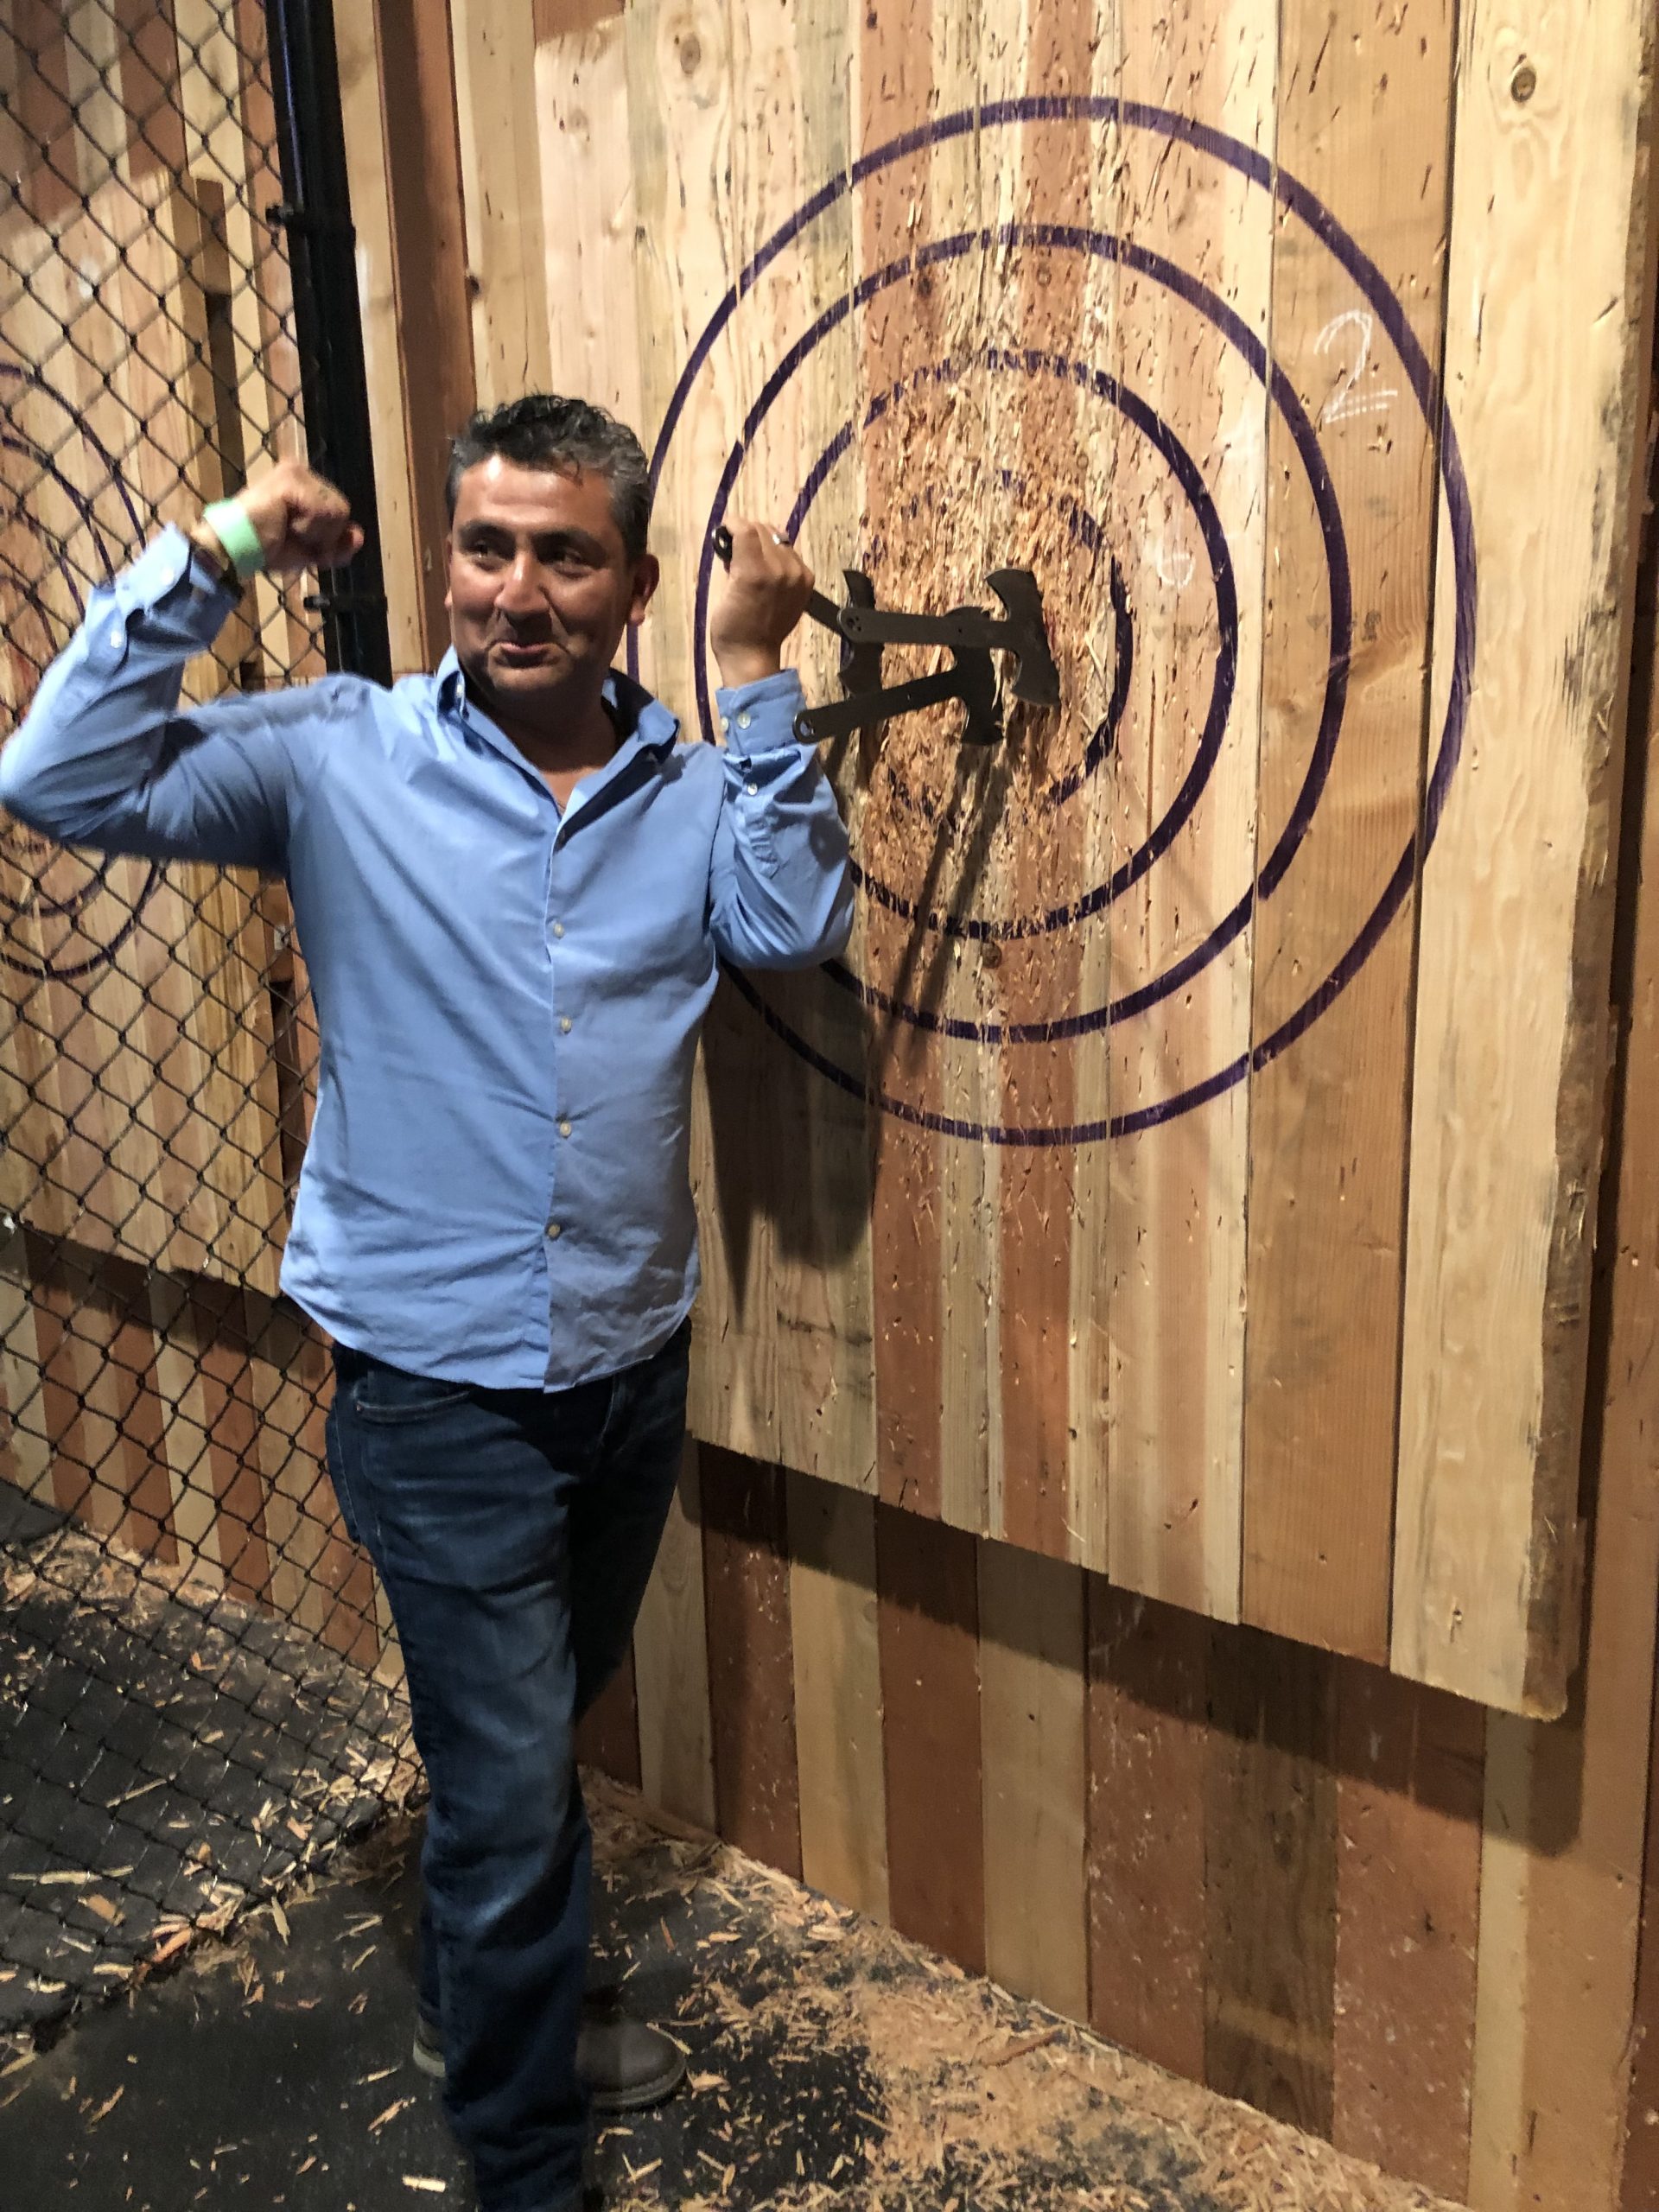 A man posing in front of a wooden target.